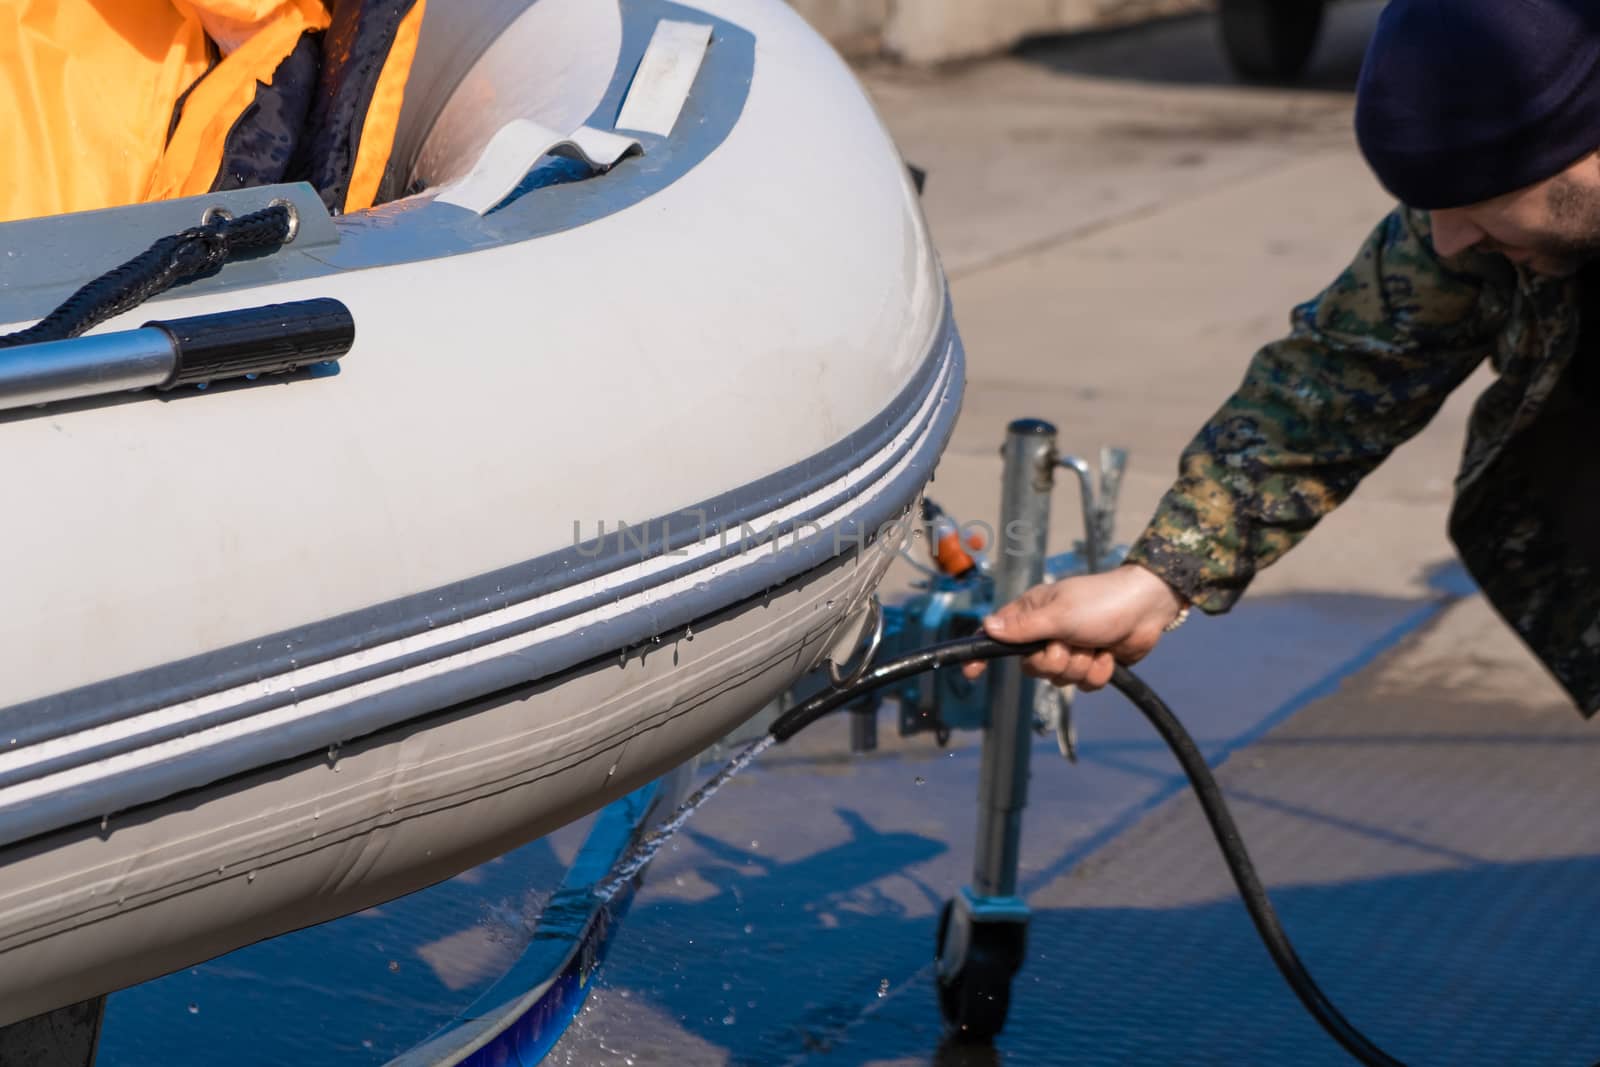 A man washes a rubber hose boat after going to sea. Drops of water scatter from the boat.